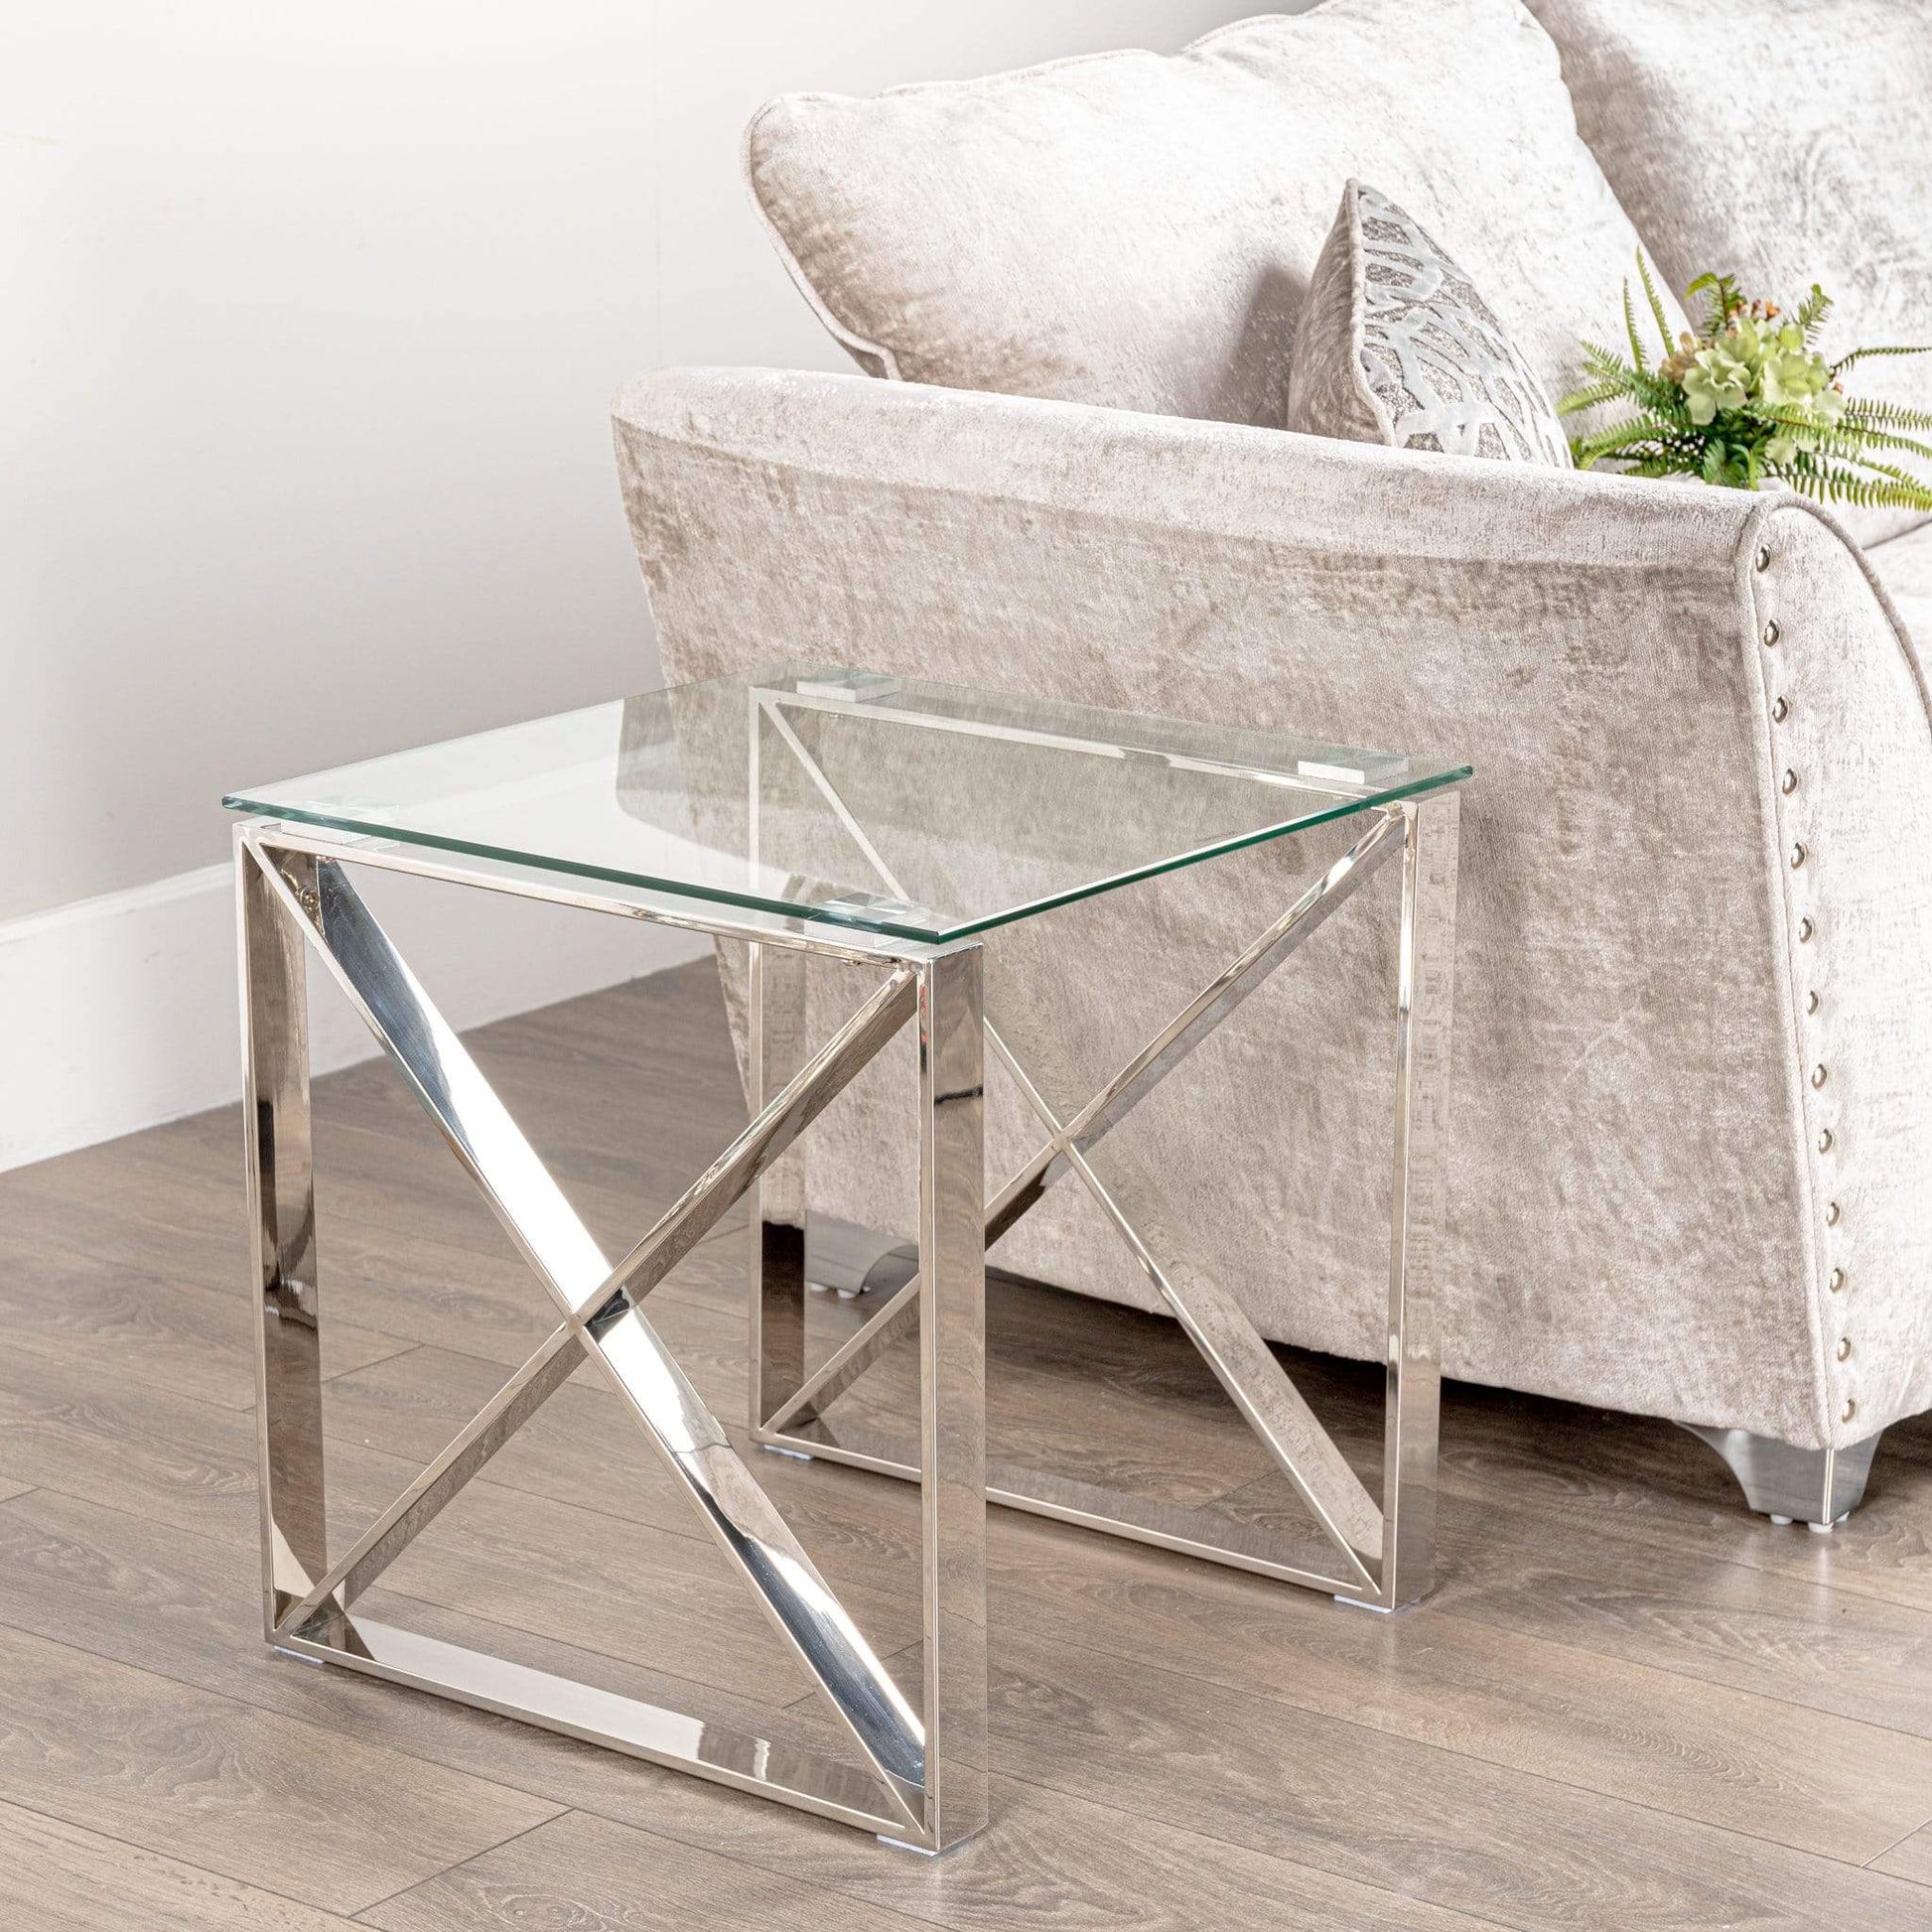 Furniture  -  New York Stainless Steel Lamp Table  -  50152286